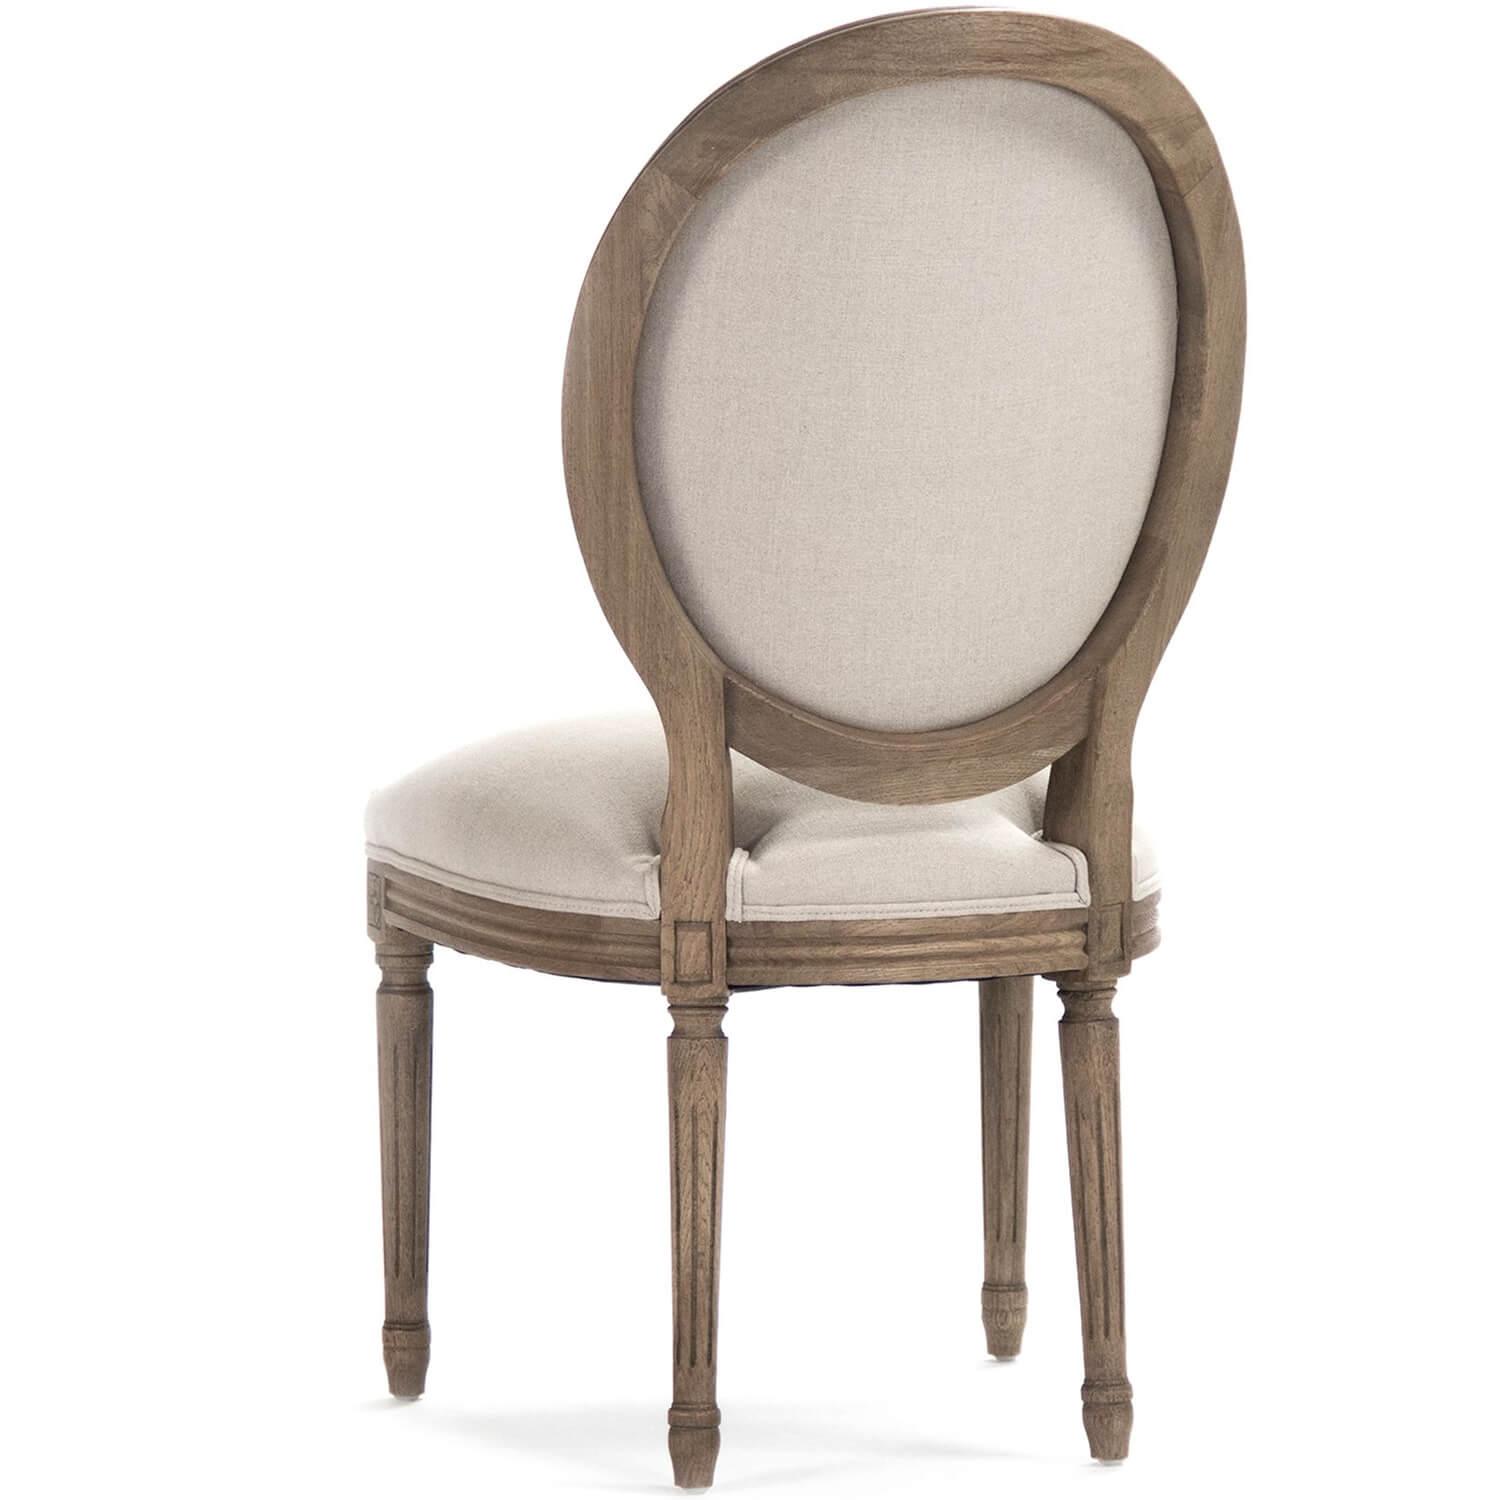 French Art Wreath Side Chairs - Pair - Belle Escape